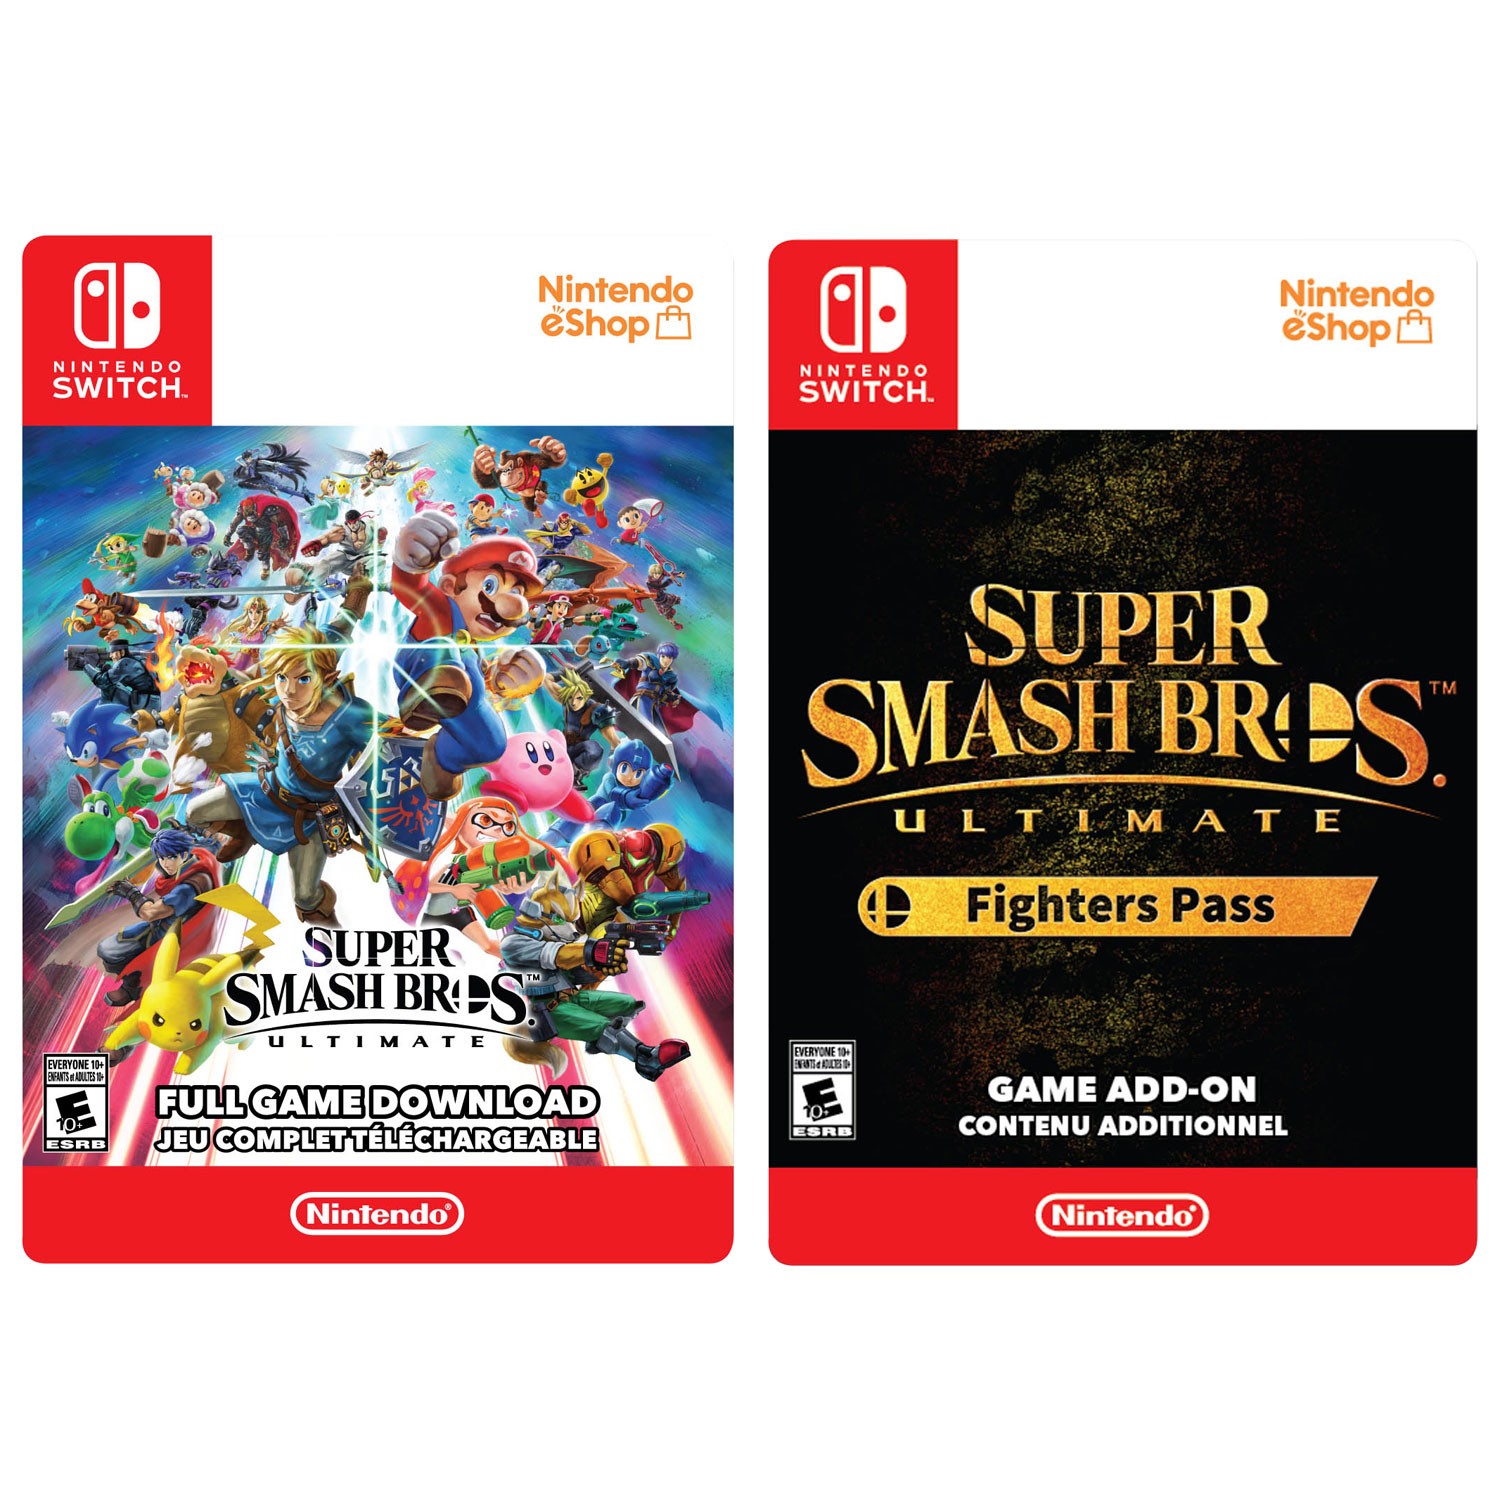 Super Smash Bros Ultimate with Fighters Pass (Switch) - Digital Download